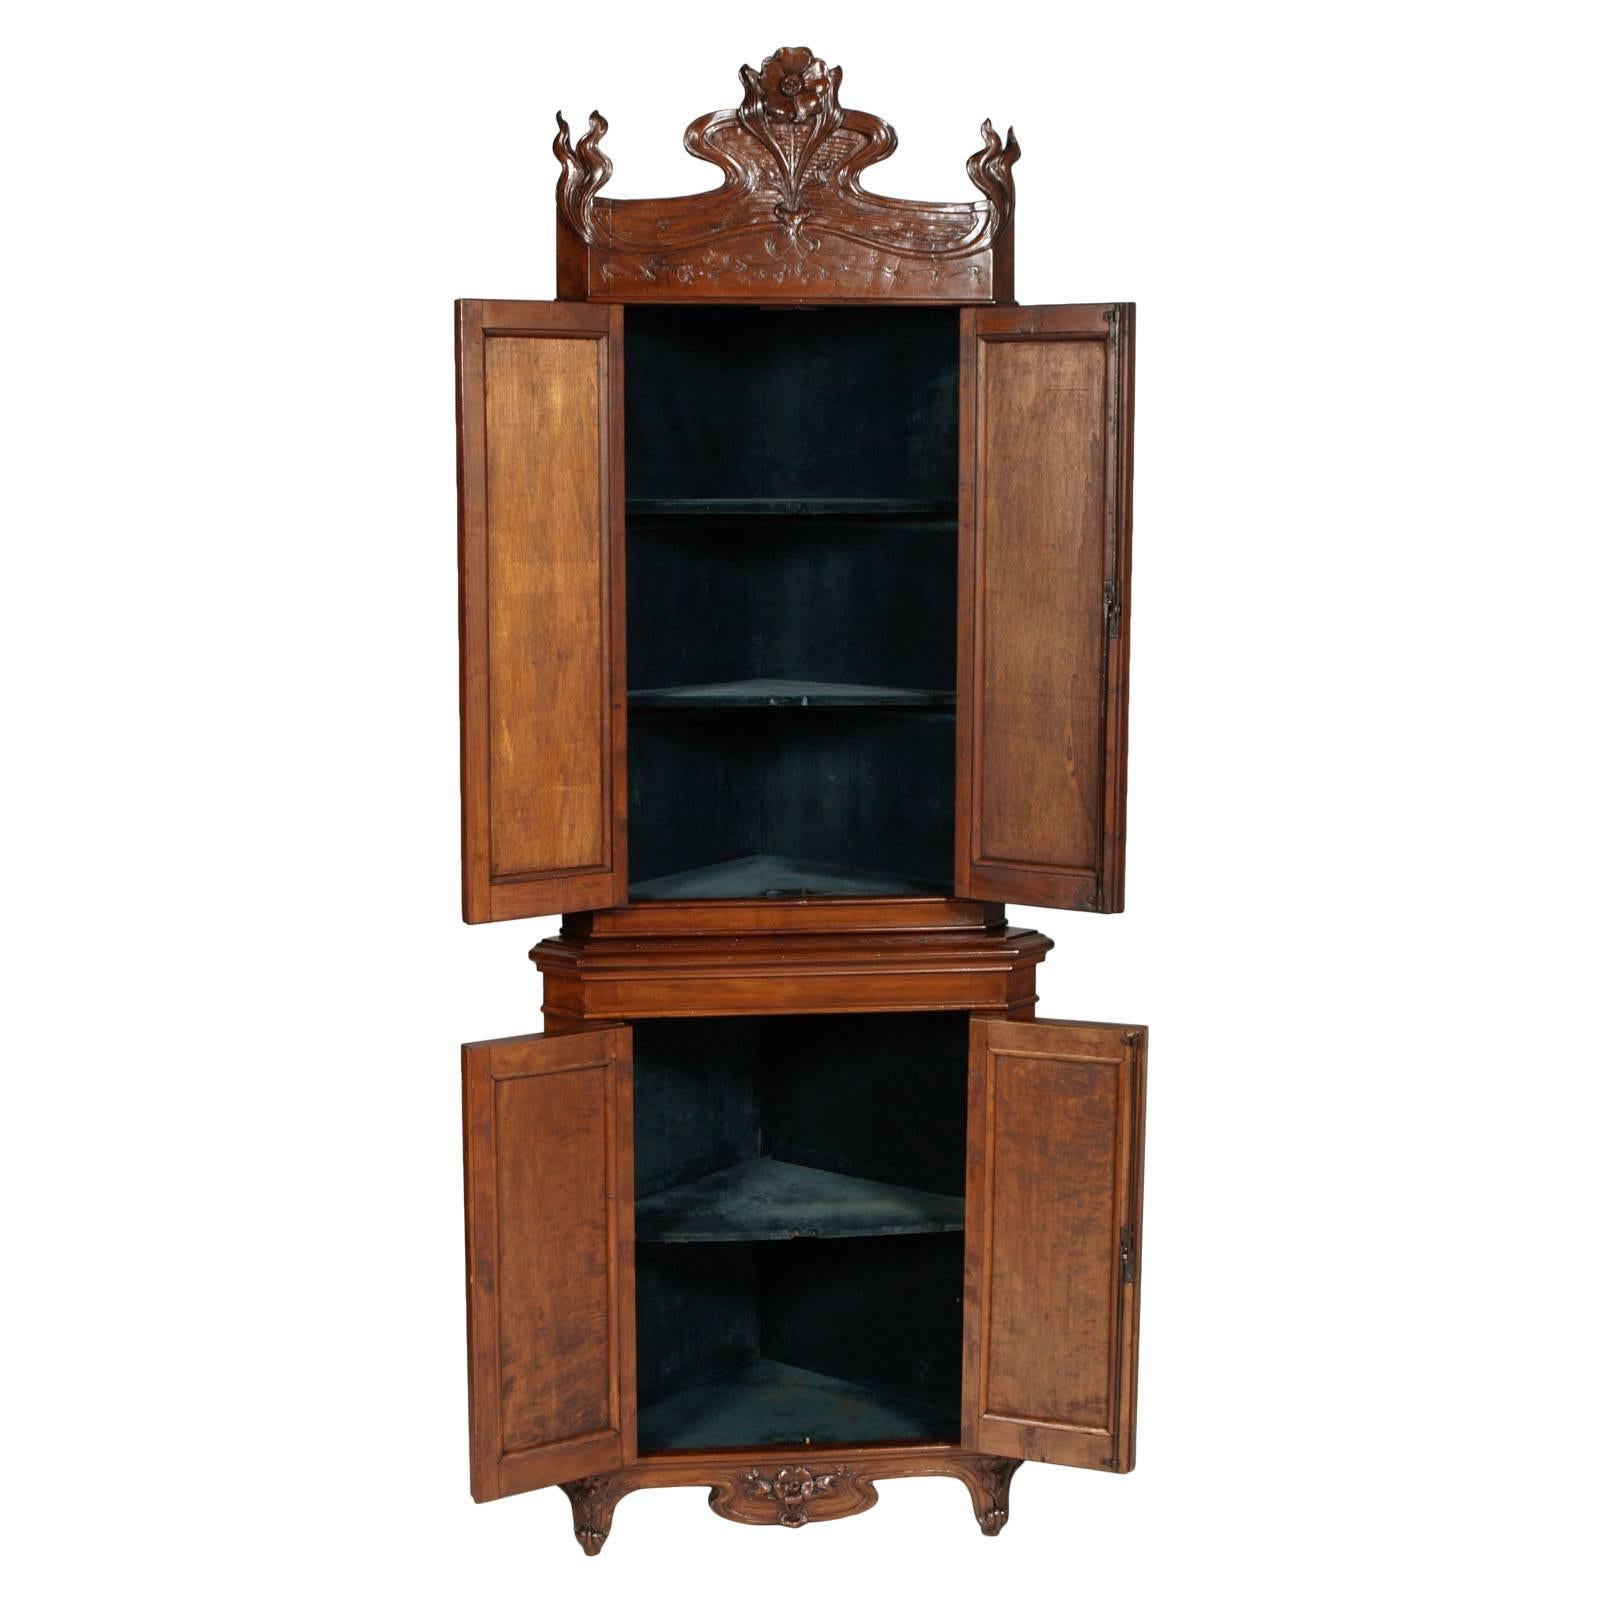 A circa 1890s Art Nouveau corner cabinet with mirror in carved walnut.
A refined work and jewel of the great Venetian sculptor ebanist Vincenzo Cadorin, highly decorated in Europe and in the US.

Measures cm: H 205, W 79, D 54 x 54.

Cadorin